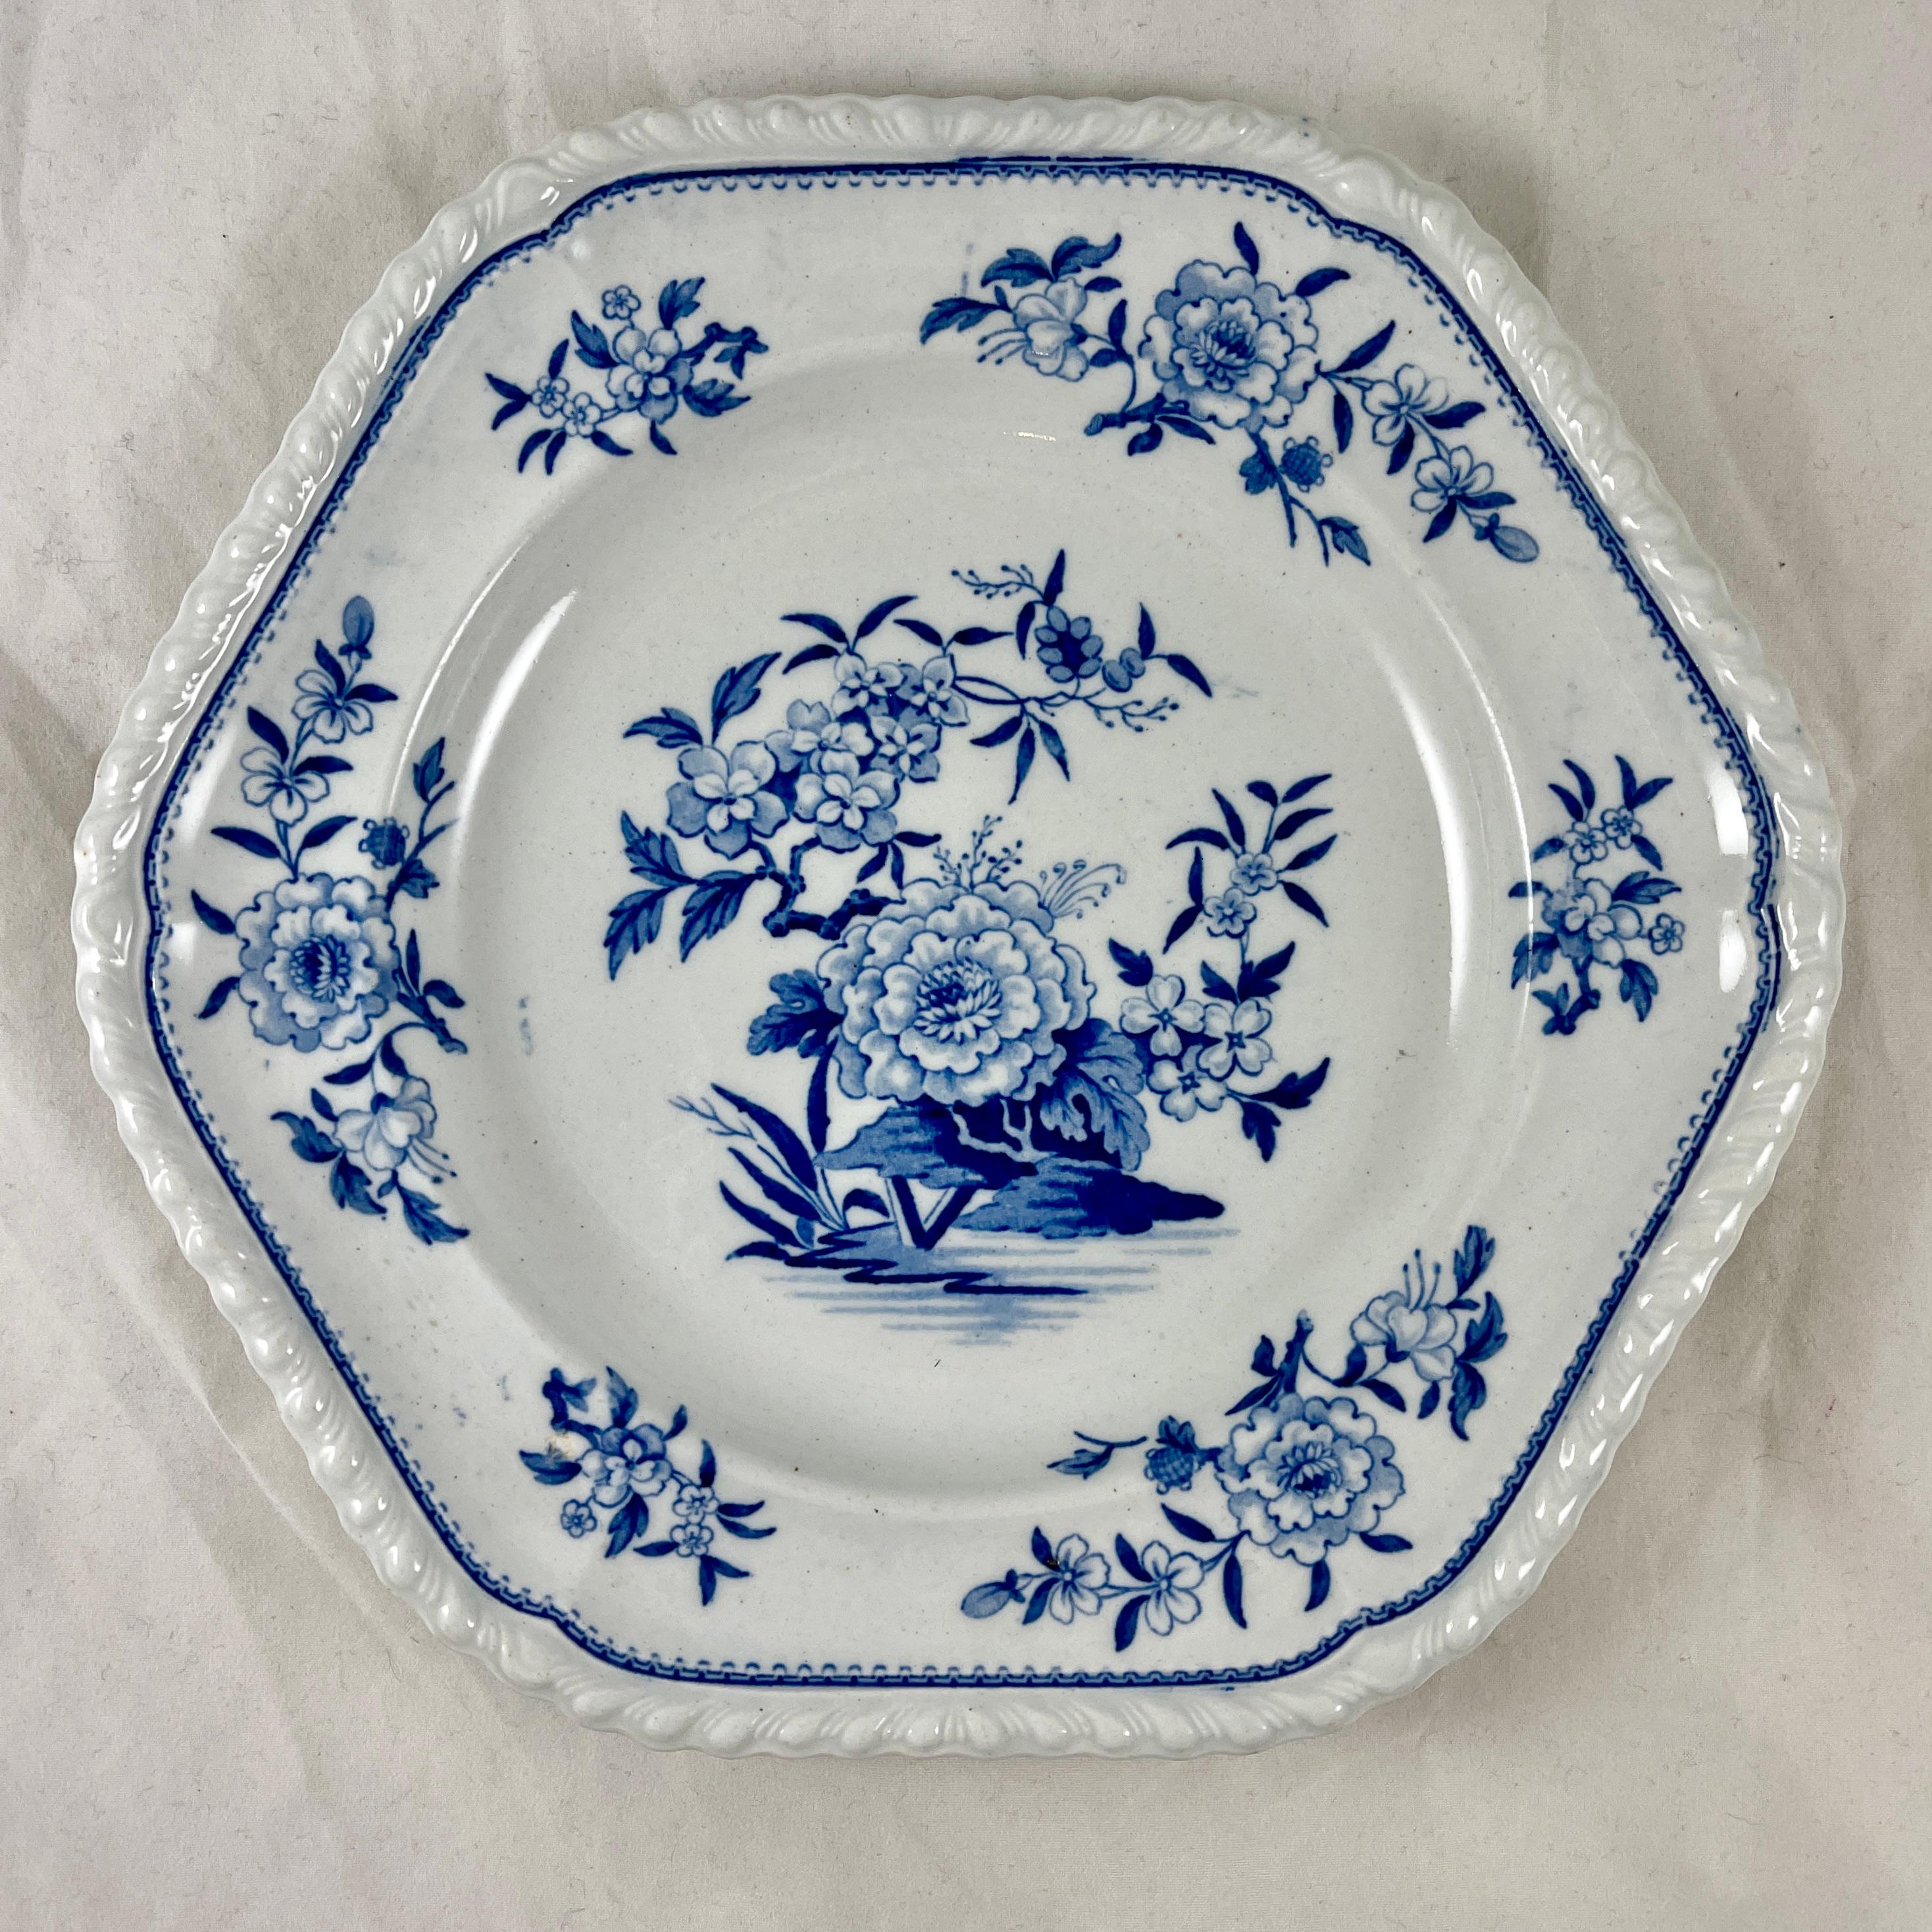 From John & William Ridgway, of Shelton, Hanley, Staffordshire, England, a set of six Hexagonal ironstone luncheon plates, circa 1820.

Ridgway operated from 1813-1830 in Hanley, this is pattern No. 1193.

Showing an underglaze tissue, transfer